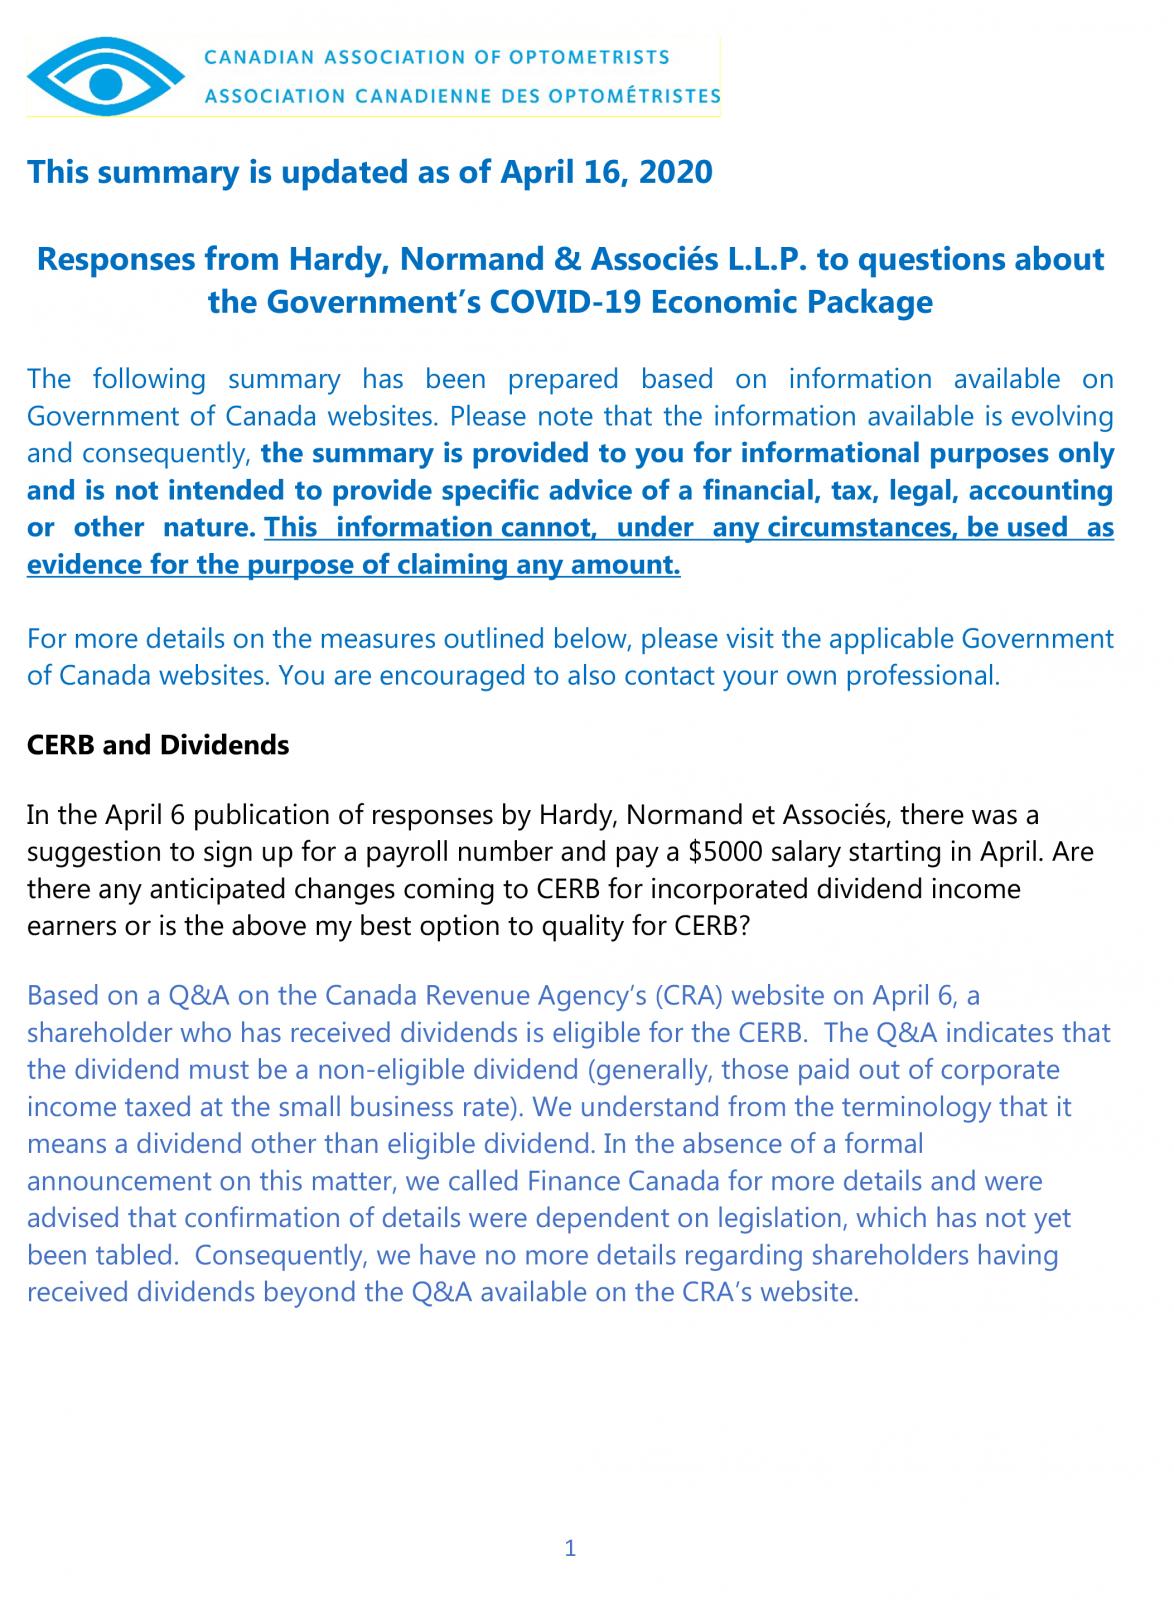 Responses from Hardy, Normand & Associés L.L.P. to questions about the Government’s COVID-19 Economic Package